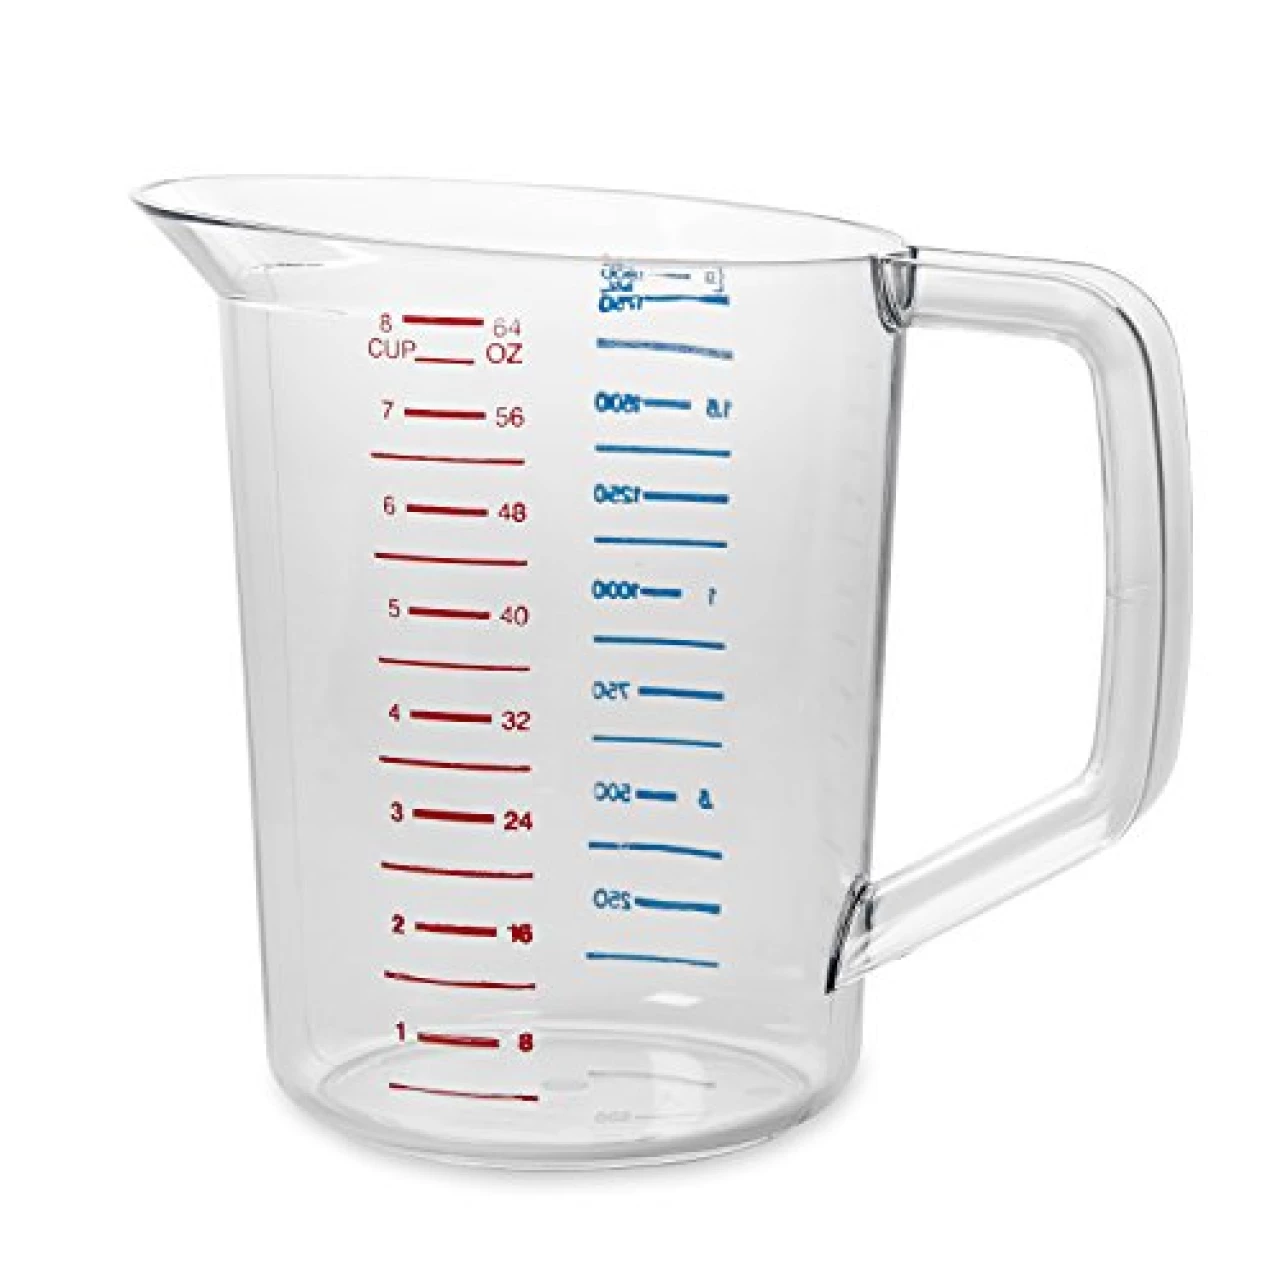 Rubbermaid Commercial Products Bouncer Clear Measuring Cup, 8-Cup/2-Quart, Clear